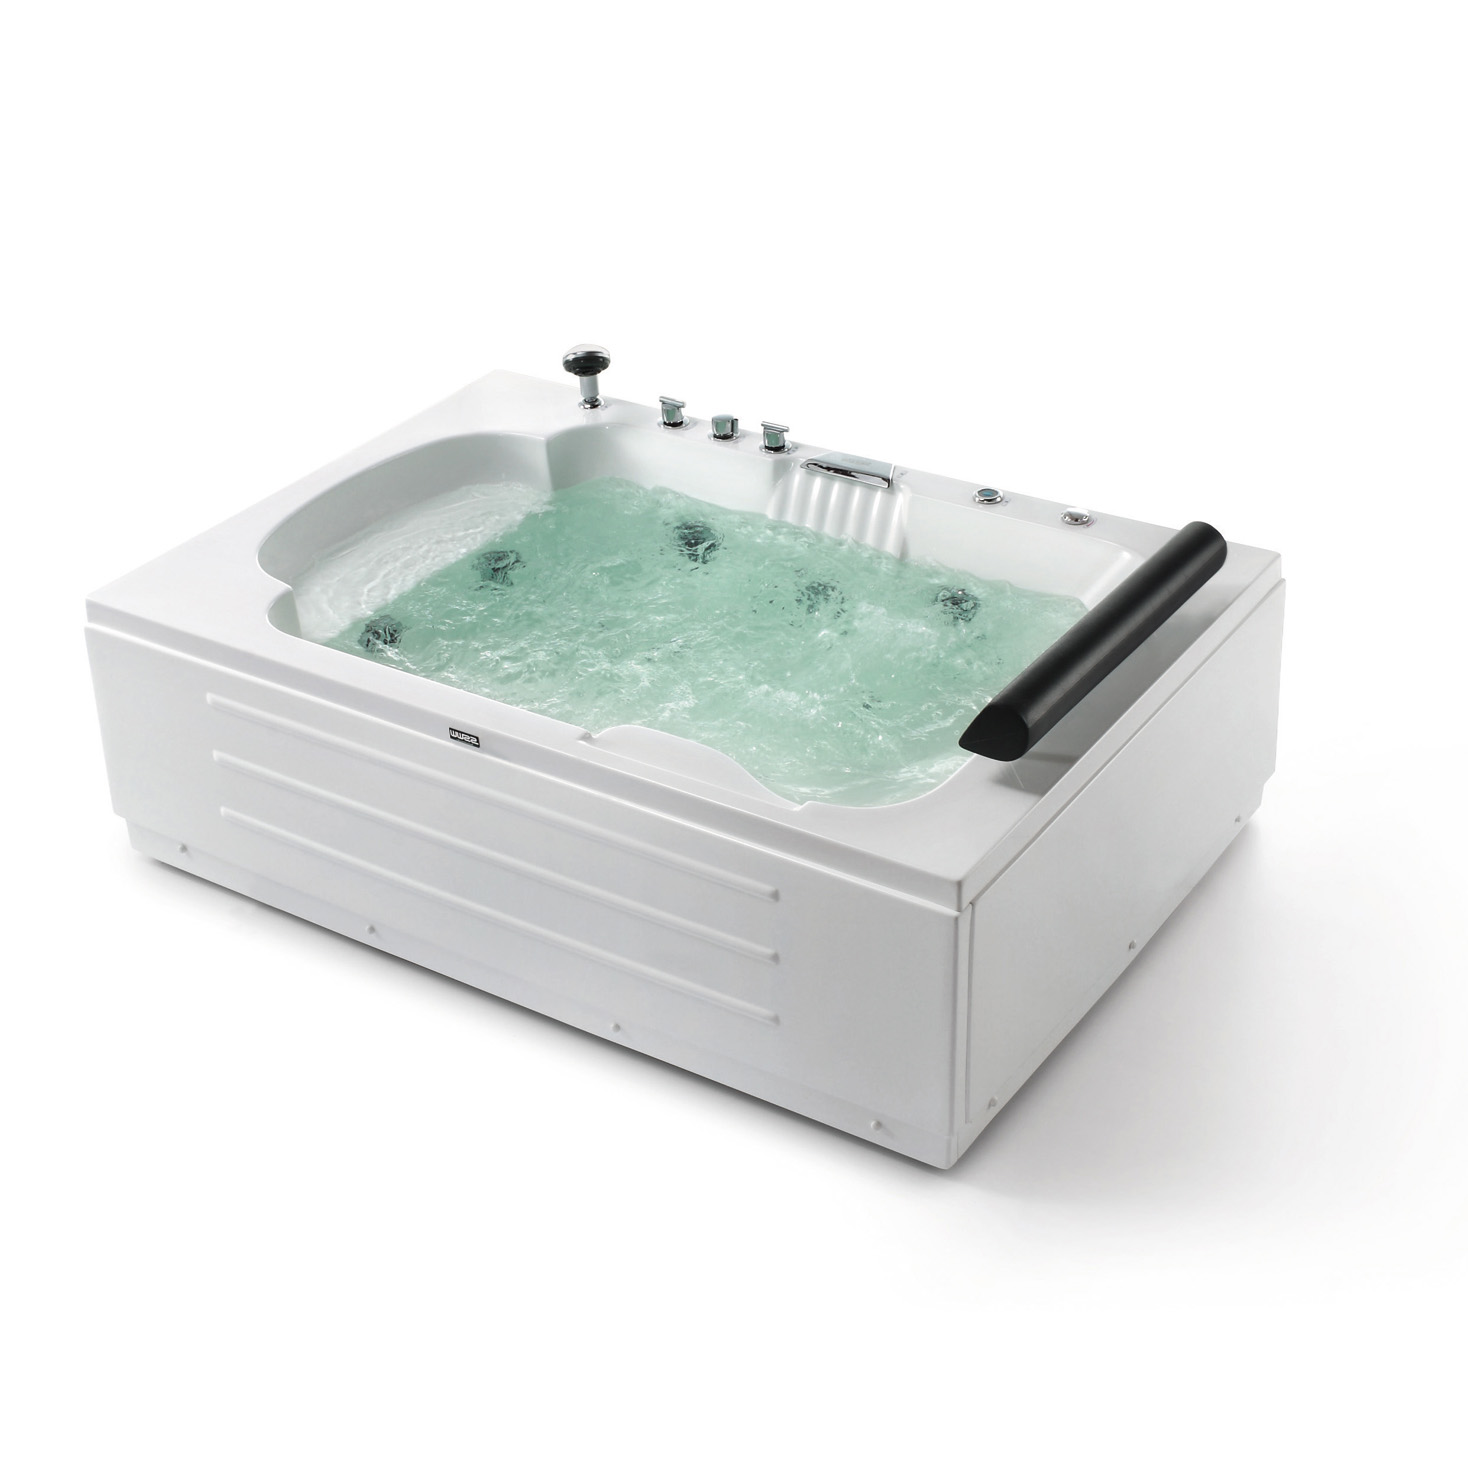 SSWW MASSAGE BATHTUB FOR 2 PERSONS 1750X1200mm Featured Image